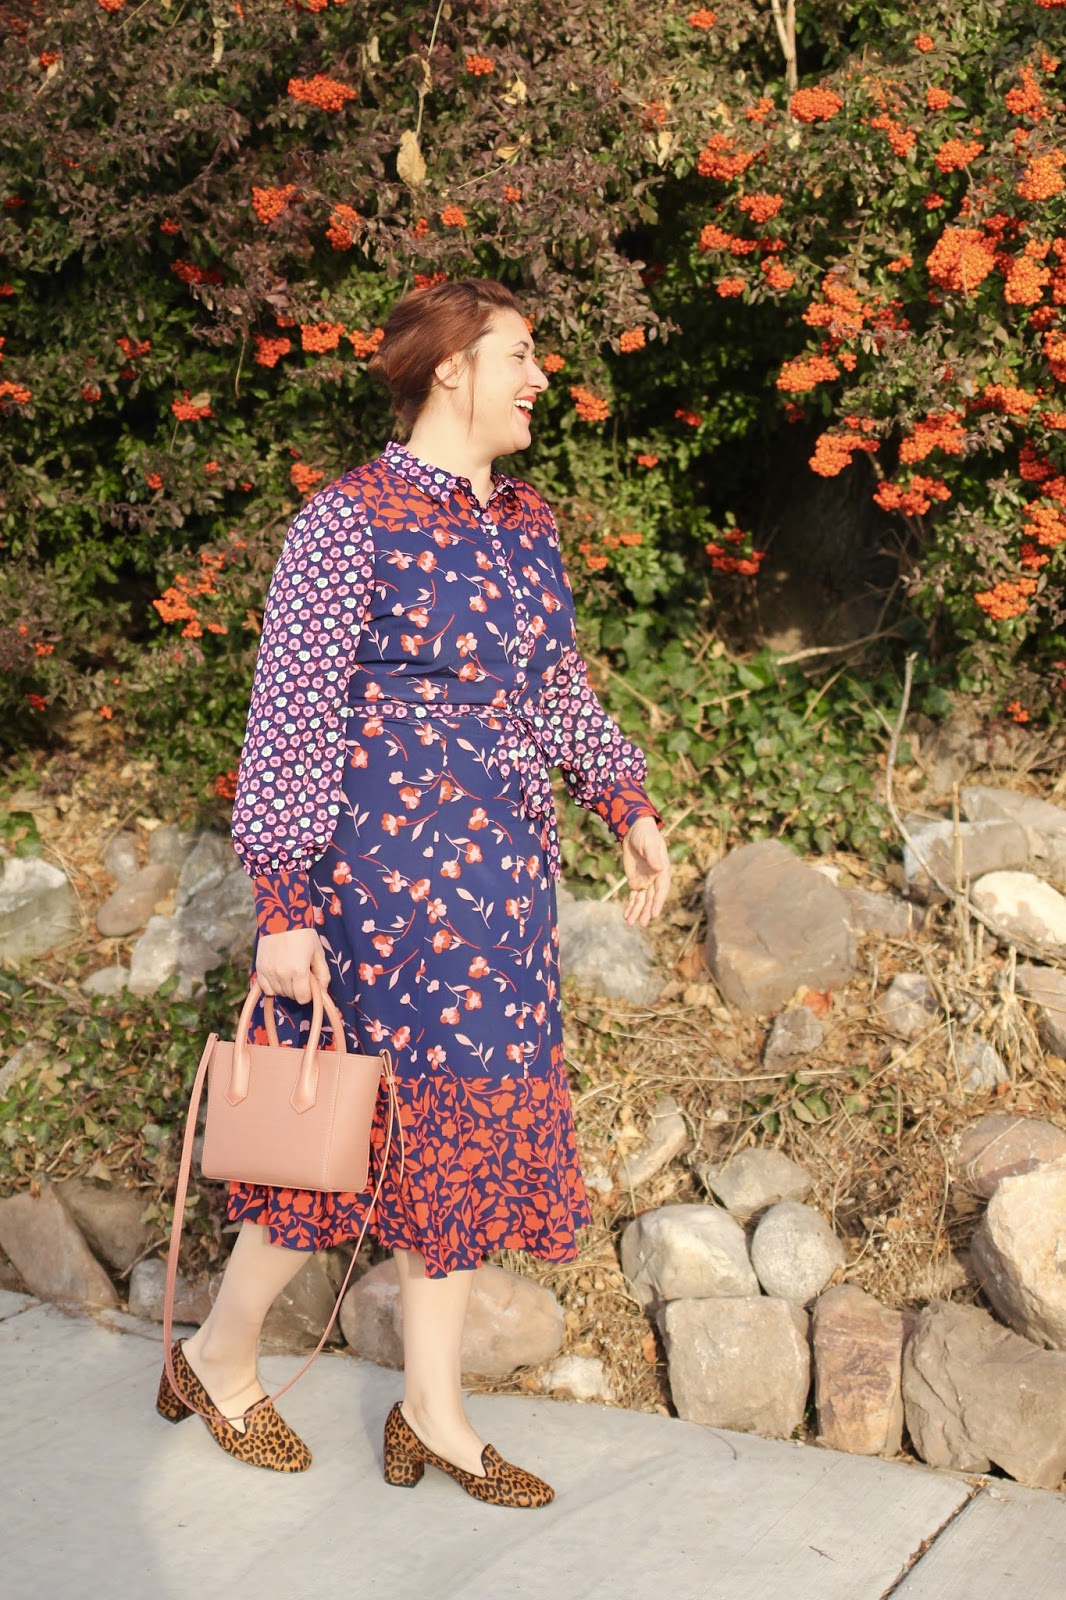 Boden sybil Shirt dress, Dagne dover petite tote warm dust, cheetah loafers